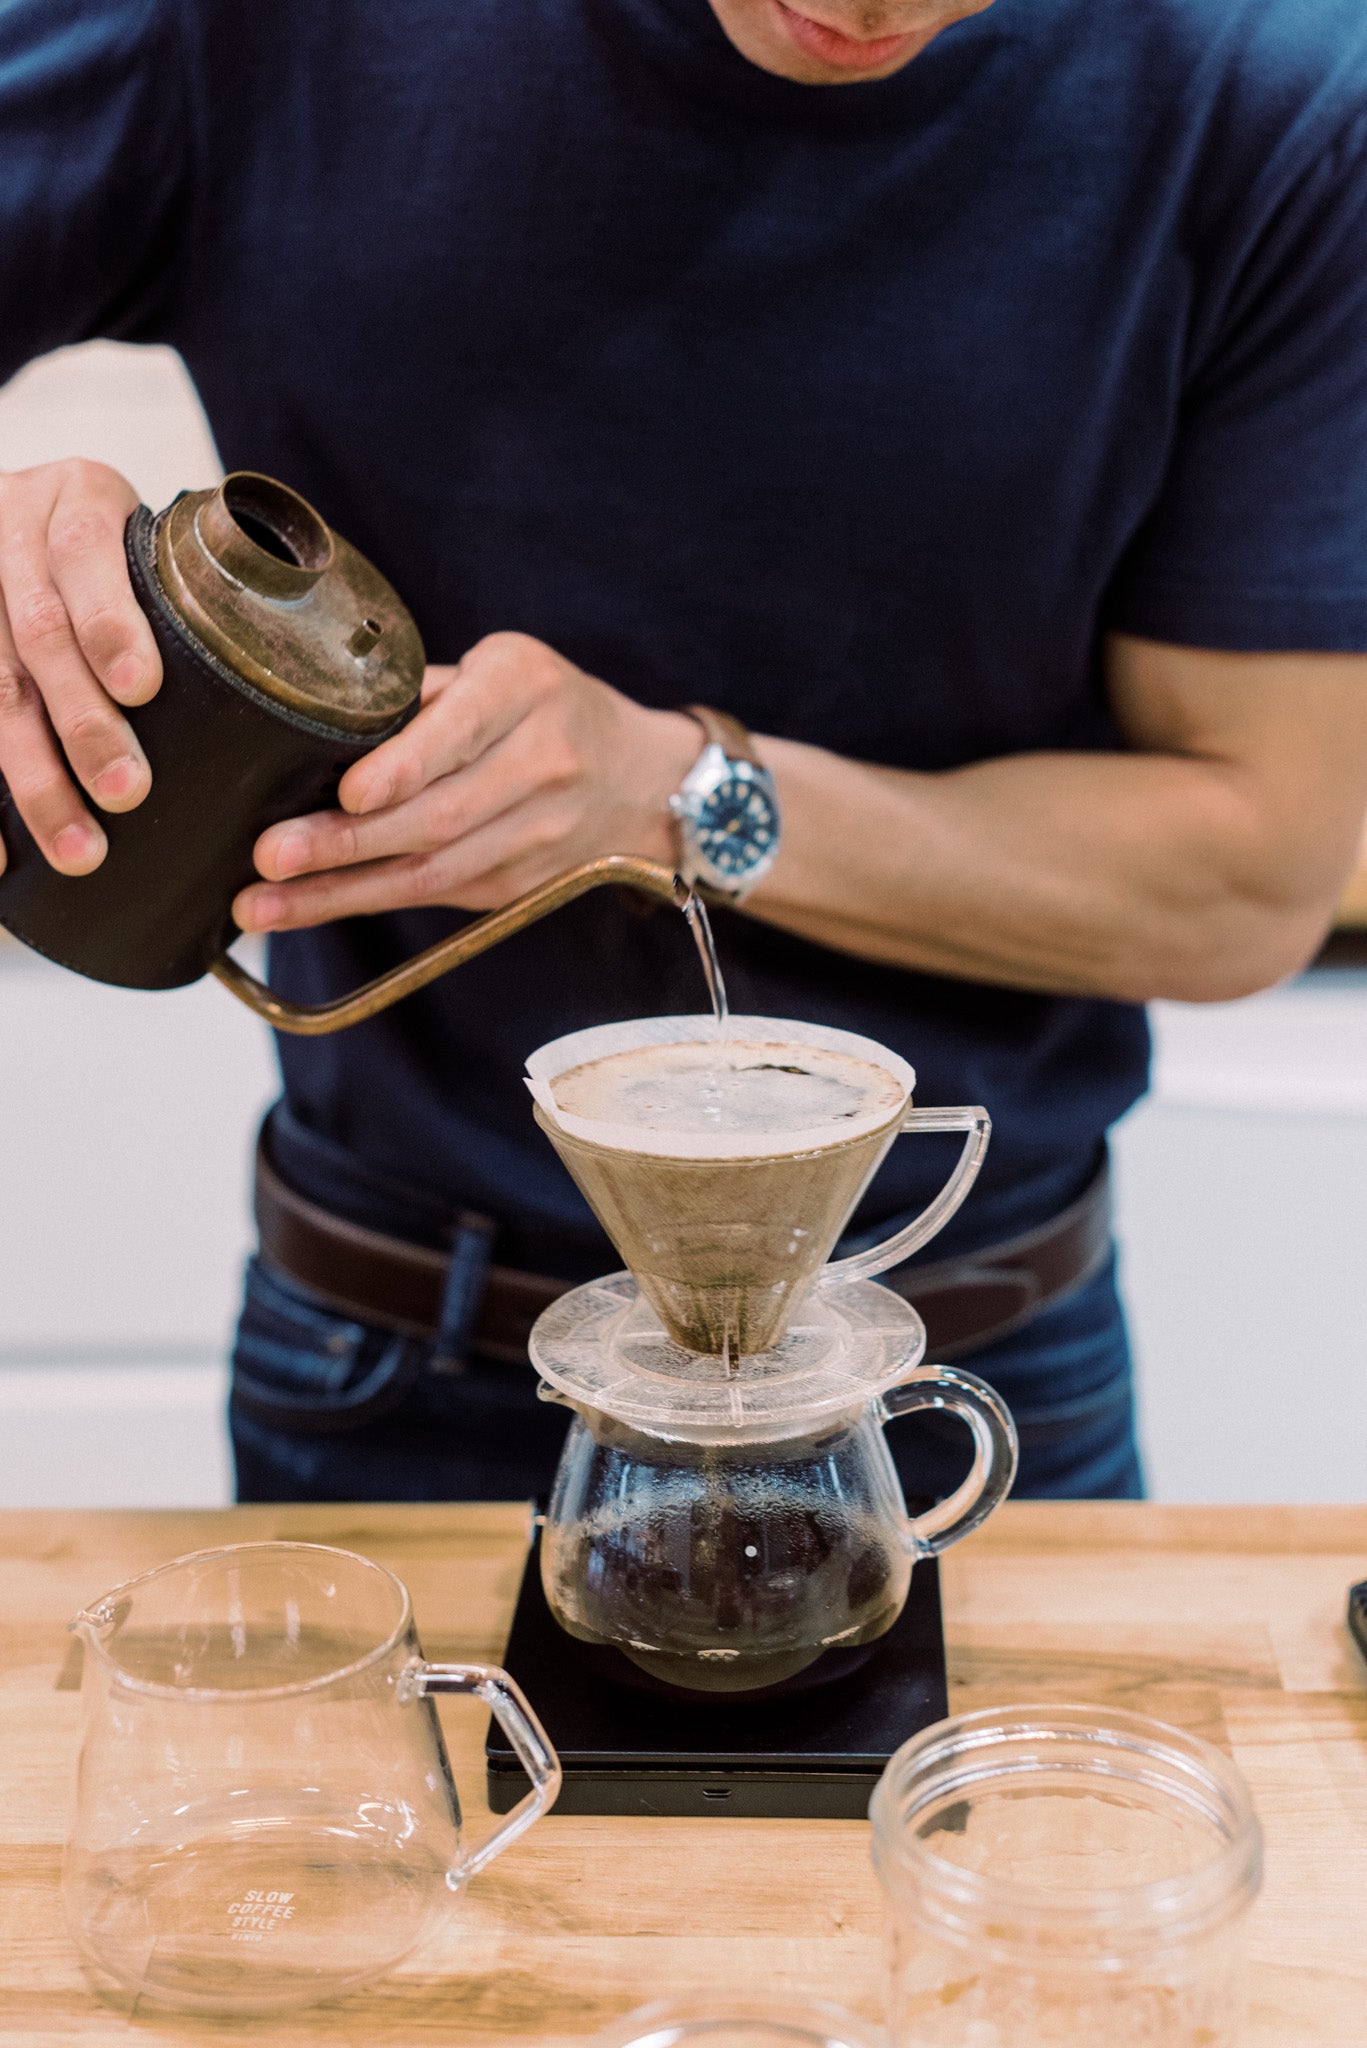 How to Make: A Pour Over Coffee